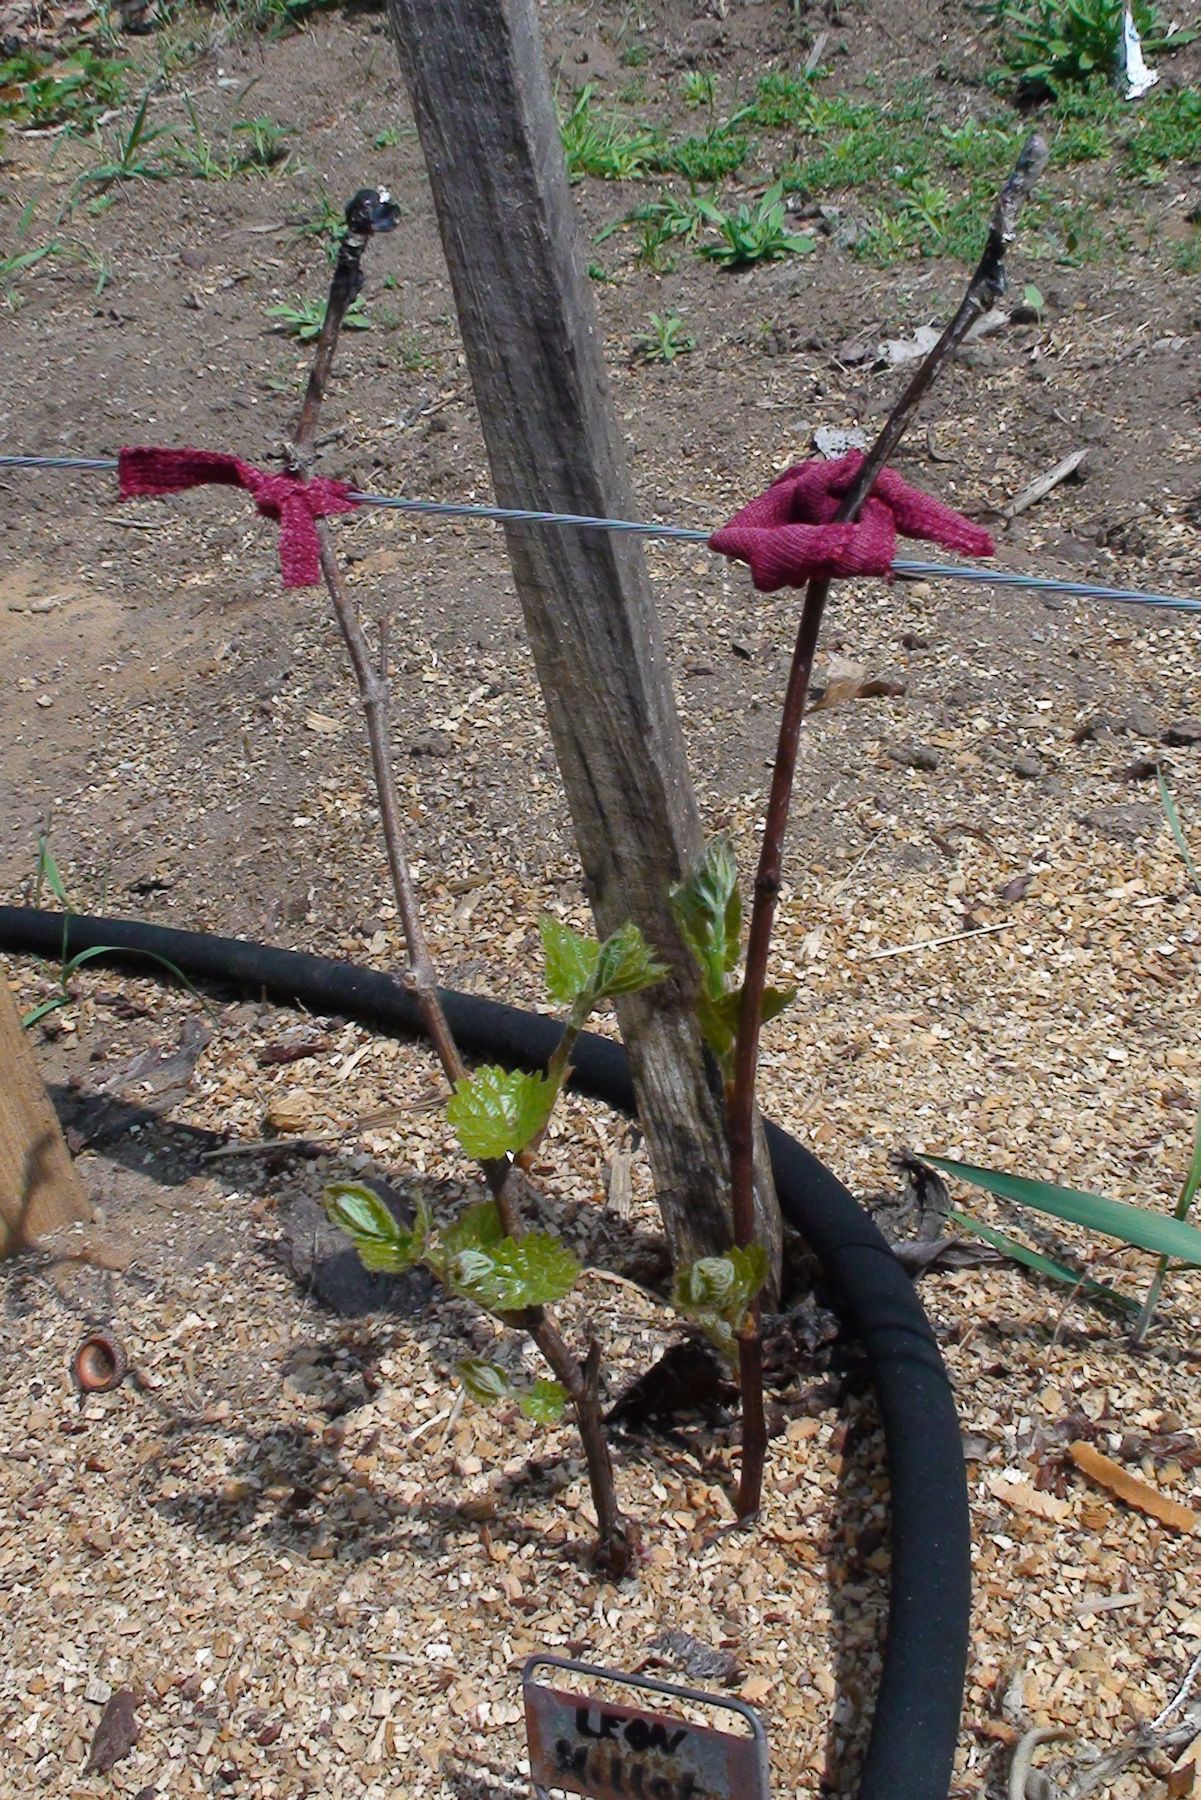 Bleeding grape vine with tourniquet allows vine to form scab and buds break